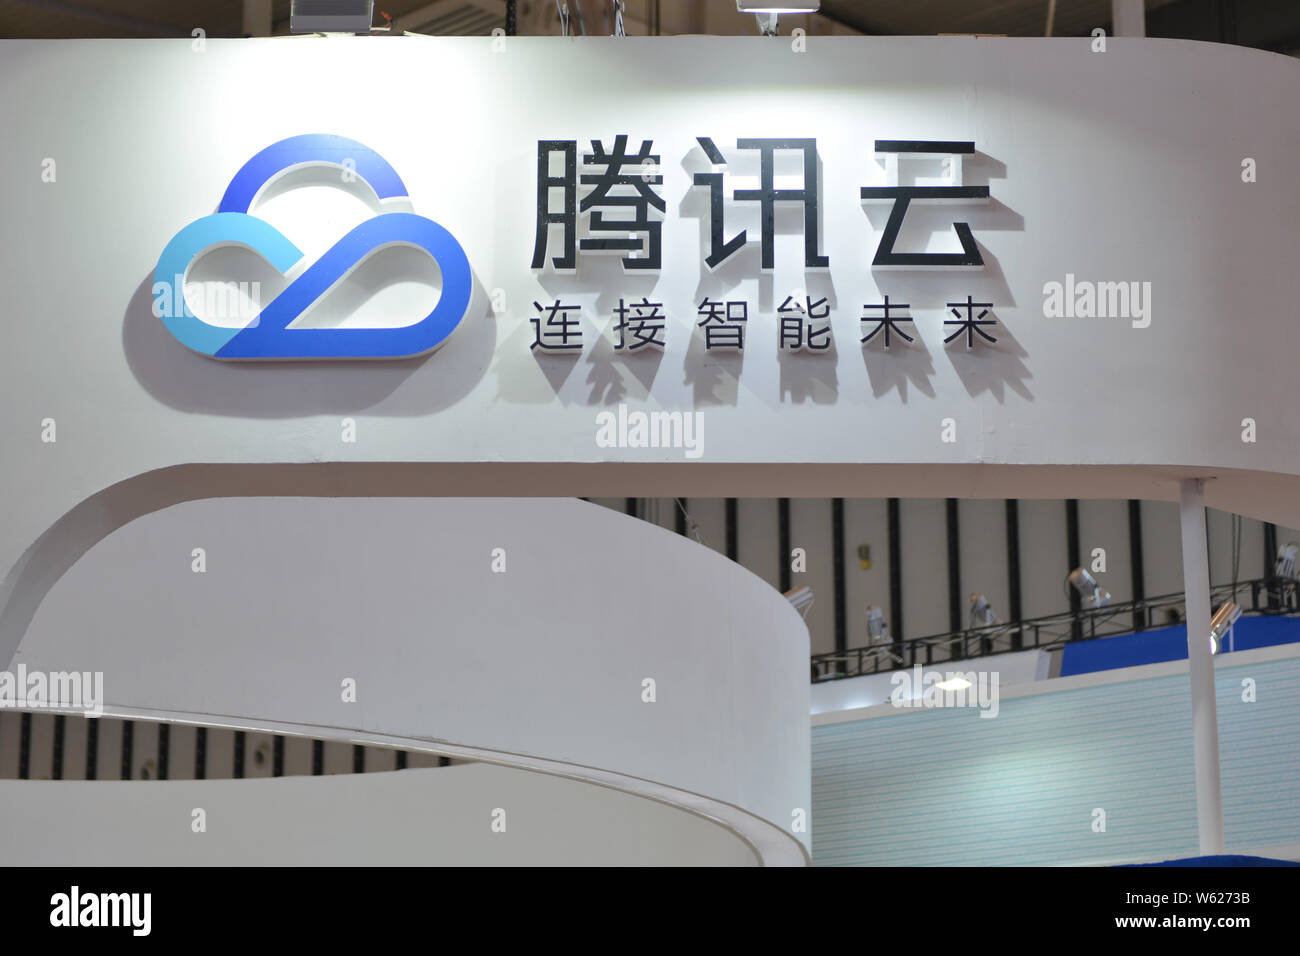 --FILE--View of the stand of Tencent Cloud during an exhibition in Nanjing city, east China's Jiangsu province, 11 October 2018.   Chinese tech giant Stock Photo